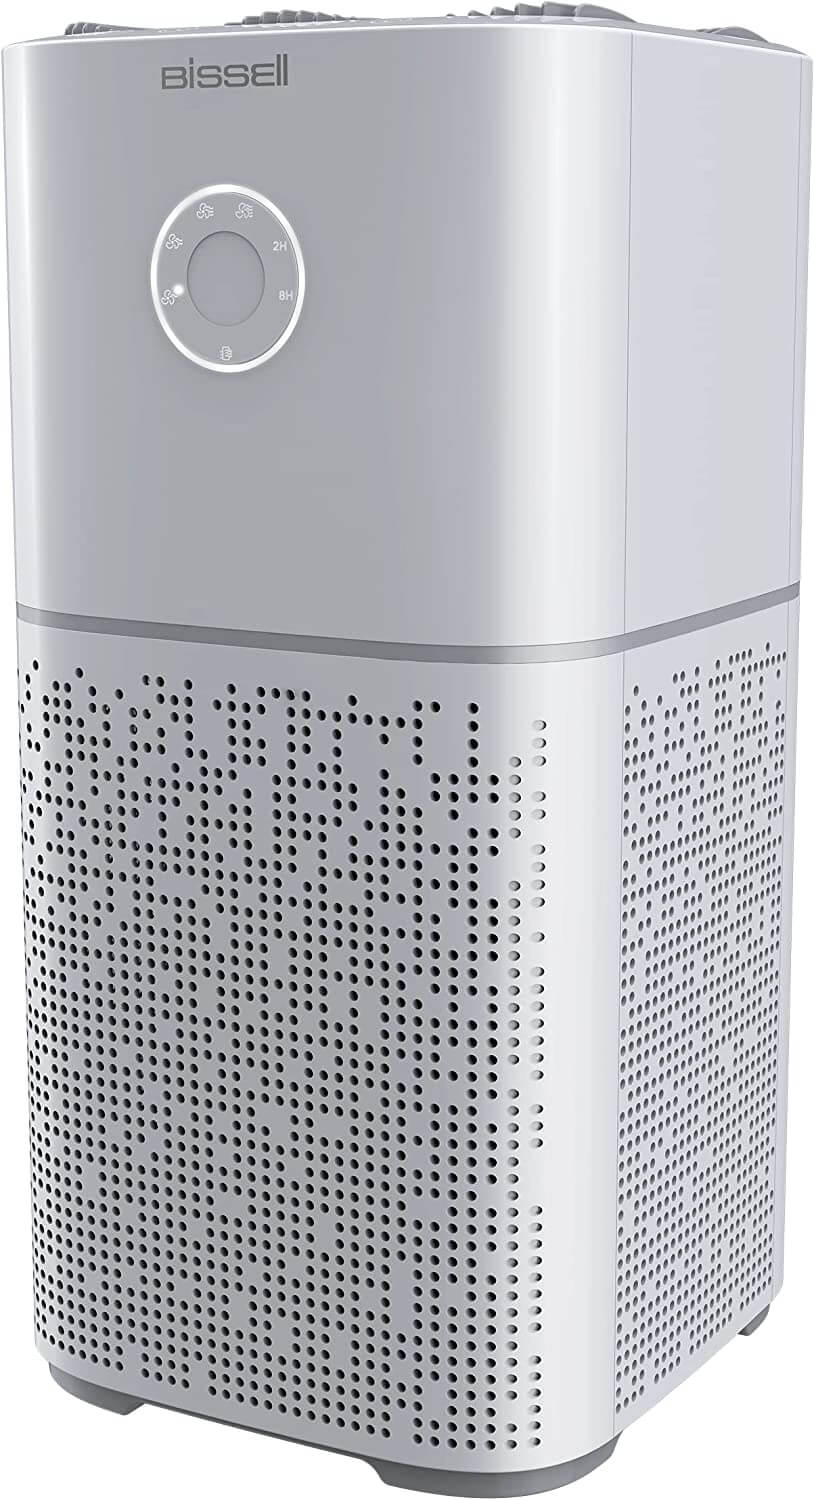 Bissell Air180 Home Air Purifier with HEPA and Carbon Filters